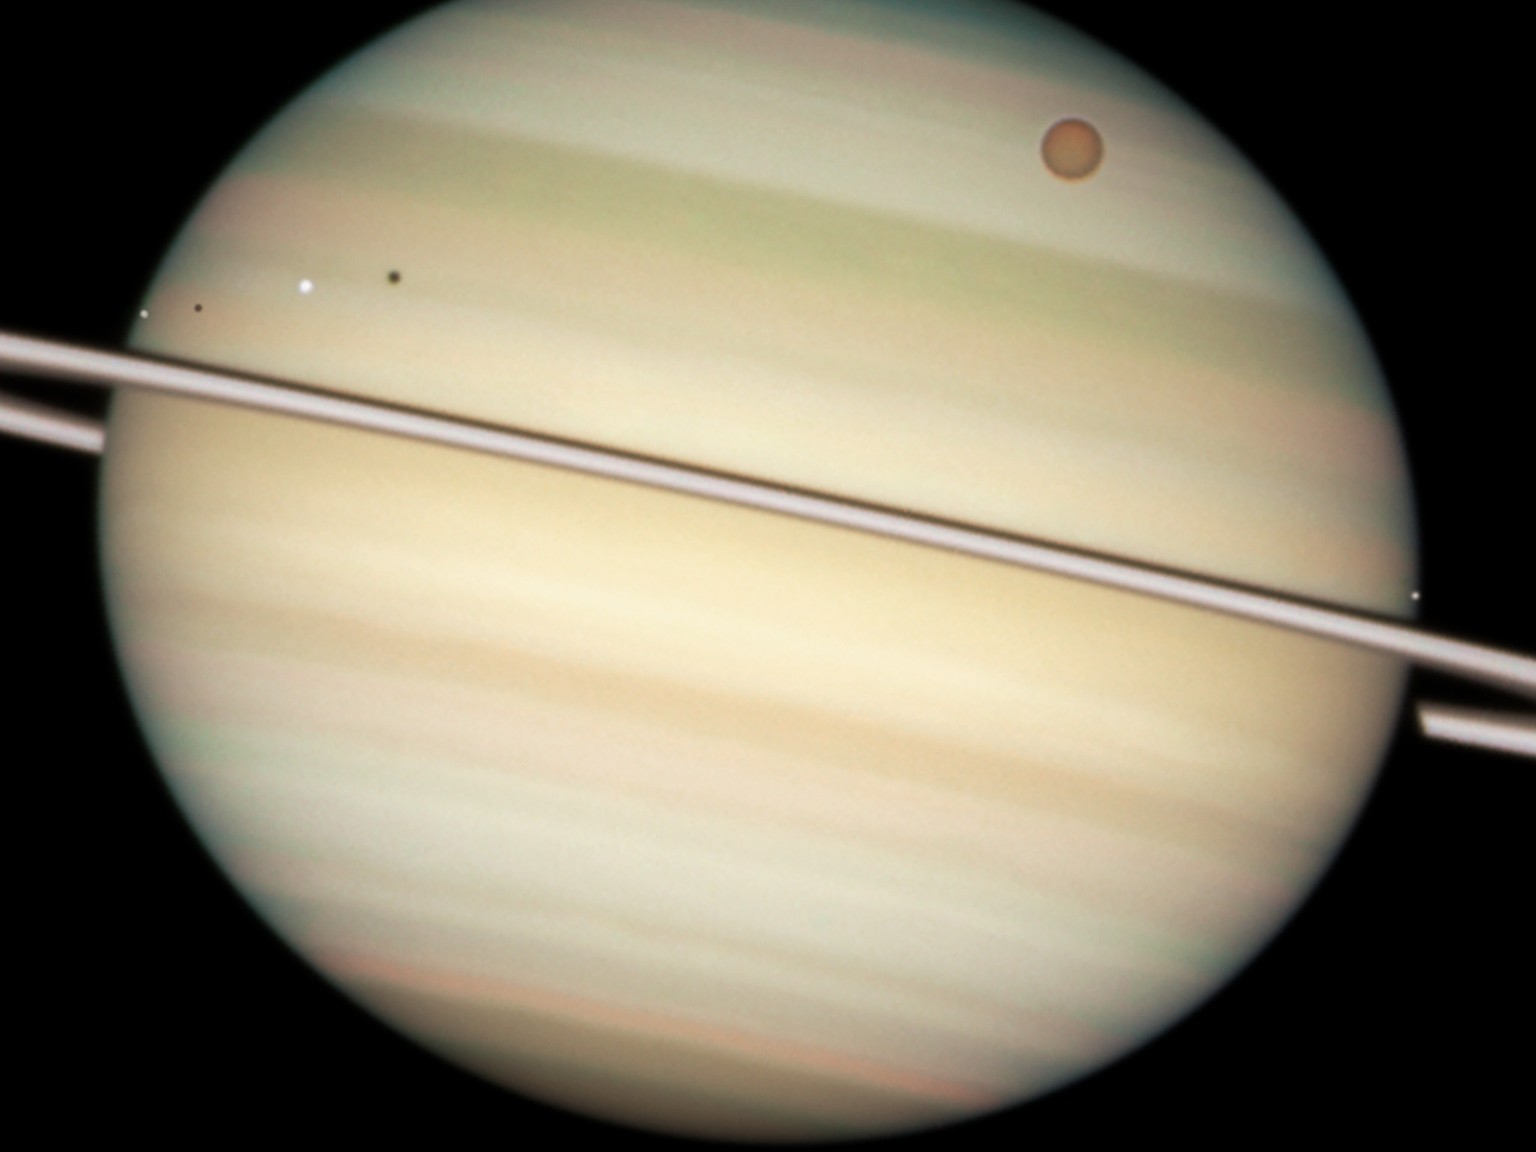 This close-up view of Saturn&#039;s disc captures the transit of several moons across the face of the gas giant planet. The giant orange moon Titan - larger than the planet Mercury - can be seen at up ...